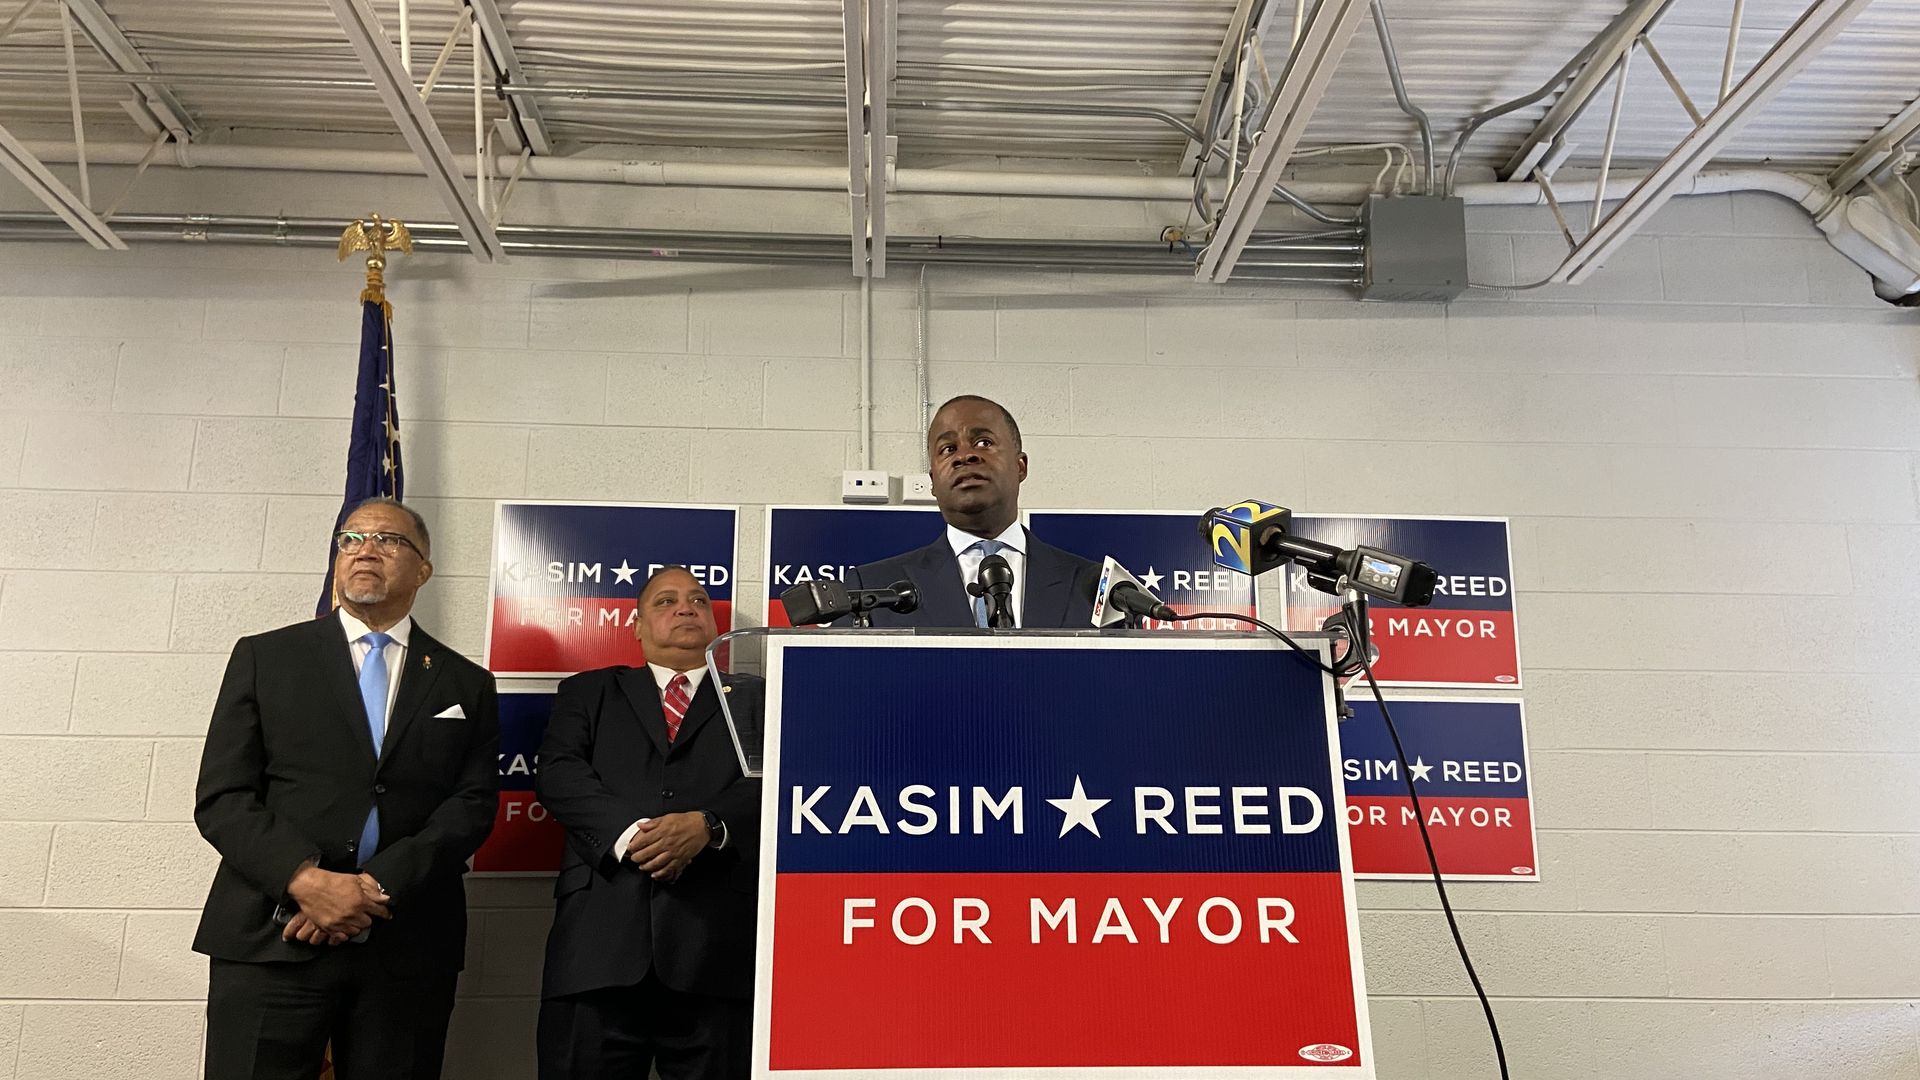 Kasim Reed stands at a podium in front of campaign signs